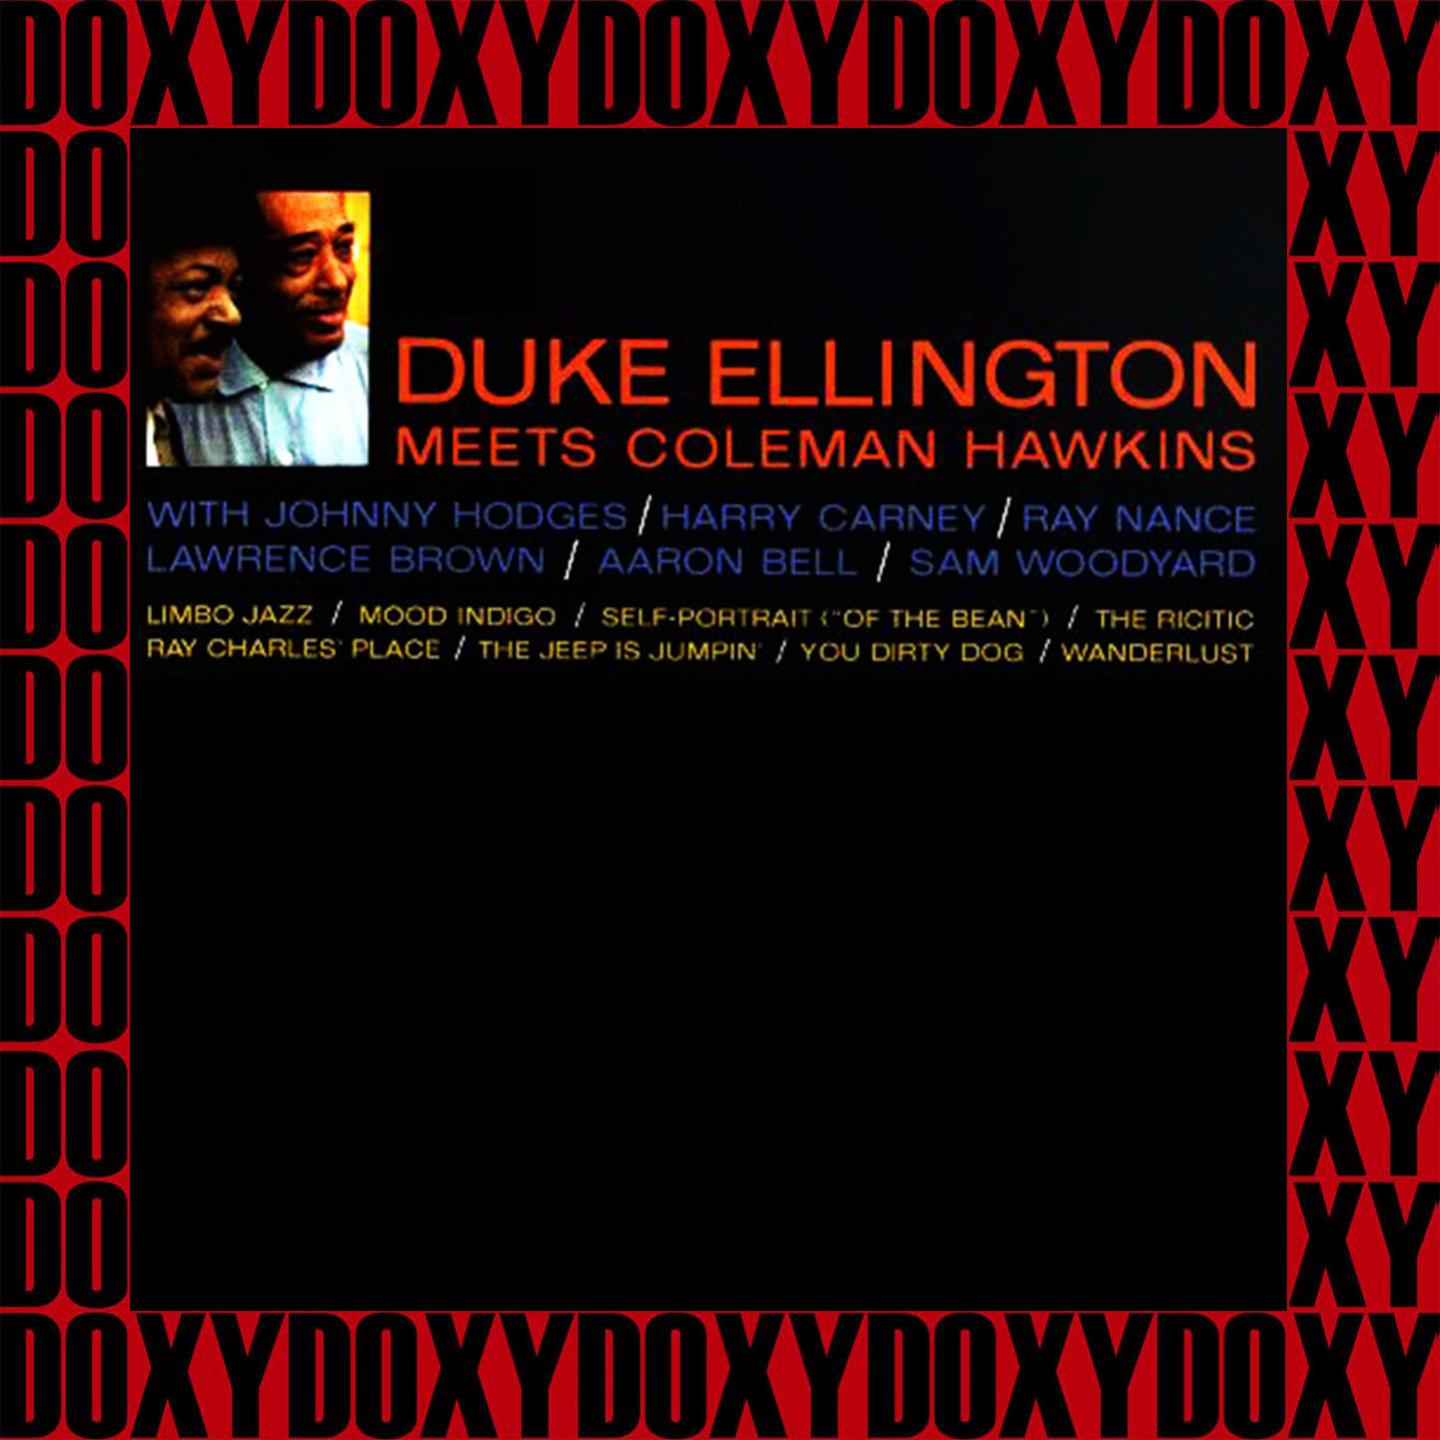 Duke Meets Coleman Hawkins (Expanded, Remastered Version) (Doxy Collection)